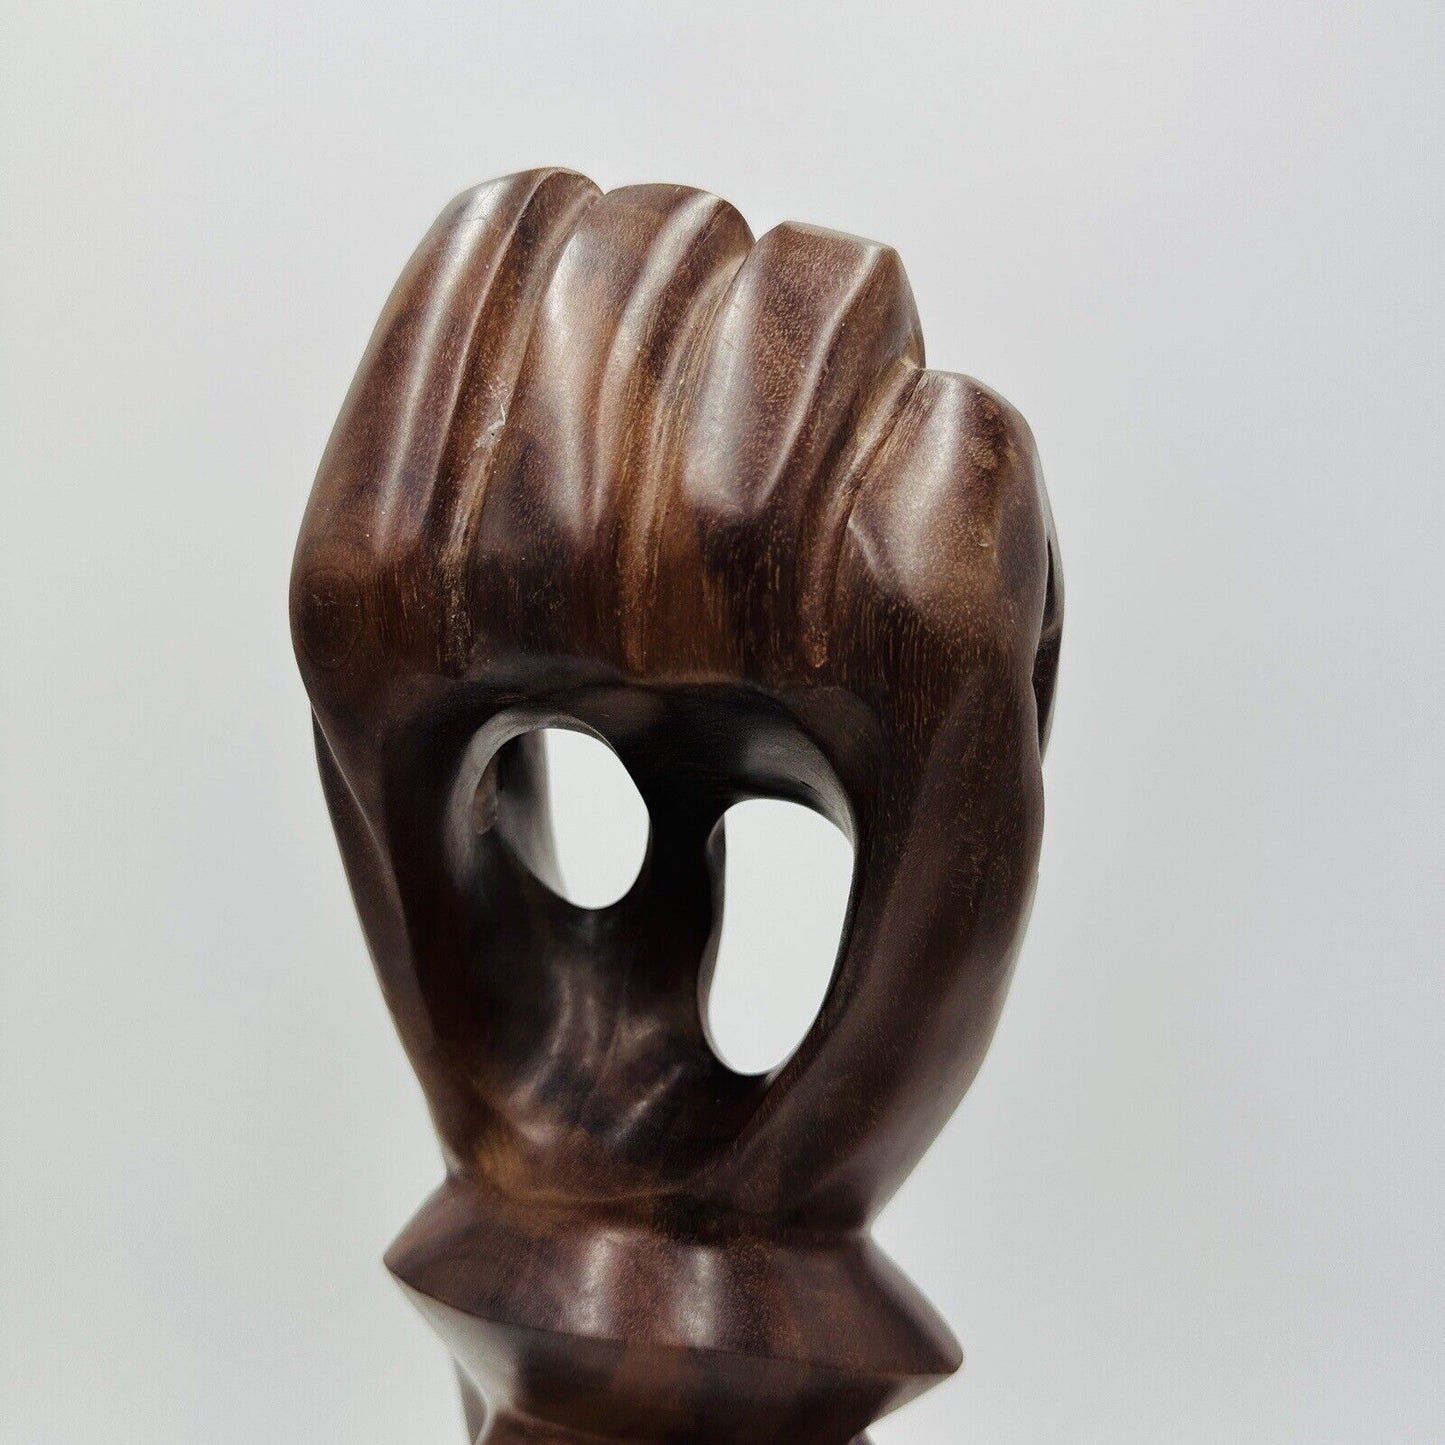 Carved Wood Sculpture Hand Foot Face Mid Century Modernism Large 19in